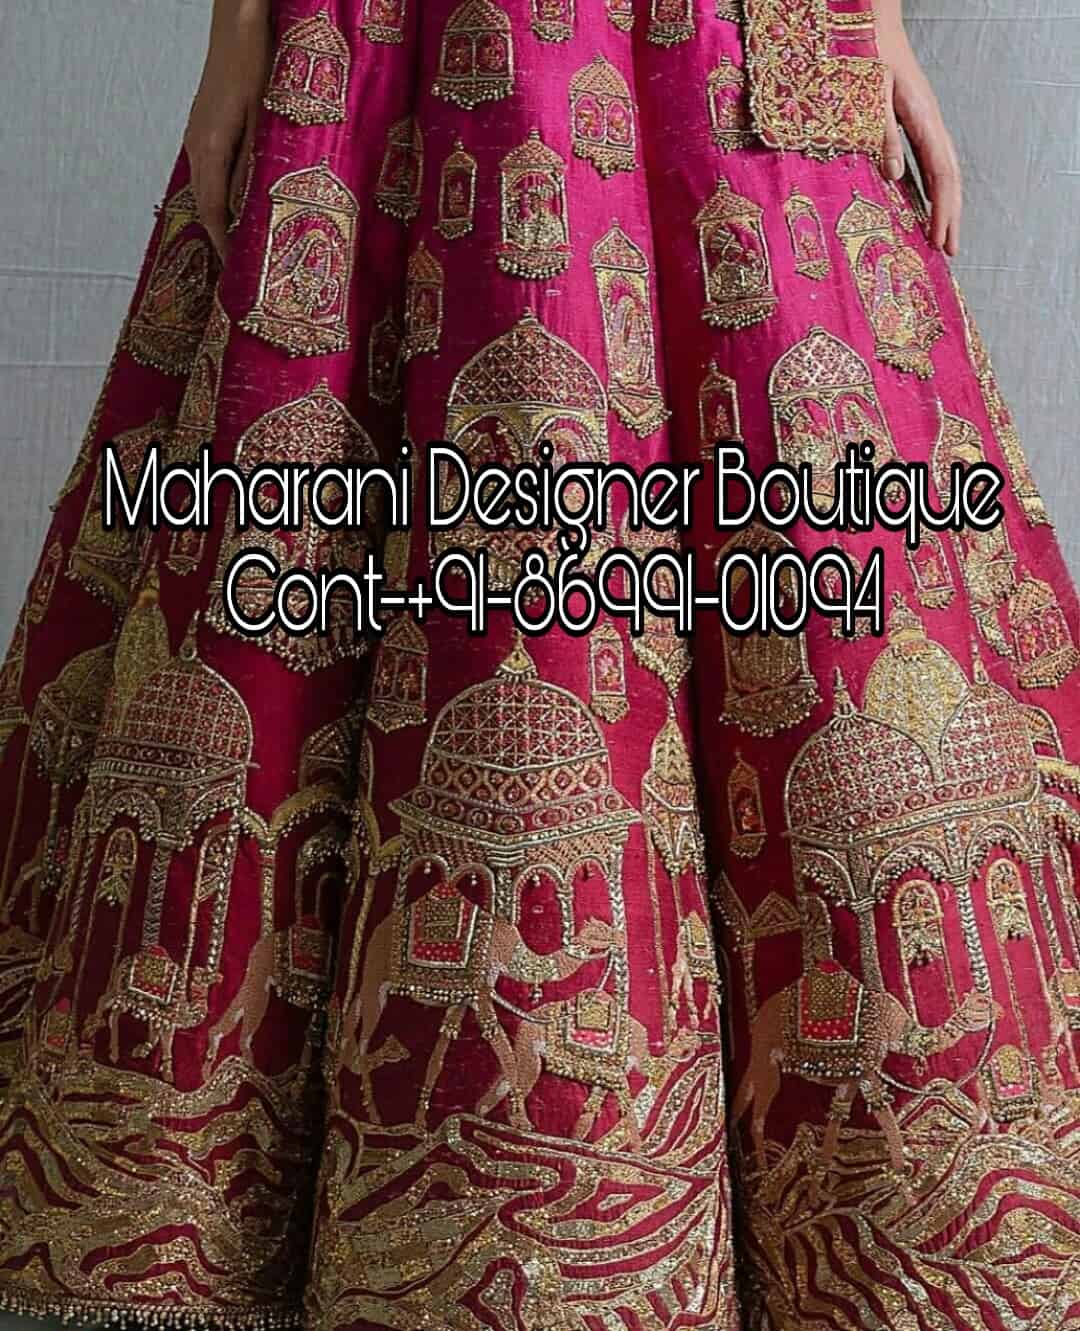 Online Shopping Bridal Lehenga Choli Maharani Designer Boutique Jodhpur is a shopping paradise and just like jaipur shopping even jodhpur shopping can't be complete without buying some traditional bandhani saree, lehenga in my previous jaipur shopping with prices and jaipur bridal lehenga shopping video i had covered rajasthan's colourful markets. mdb 11431 online shopping bridal lehenga choli